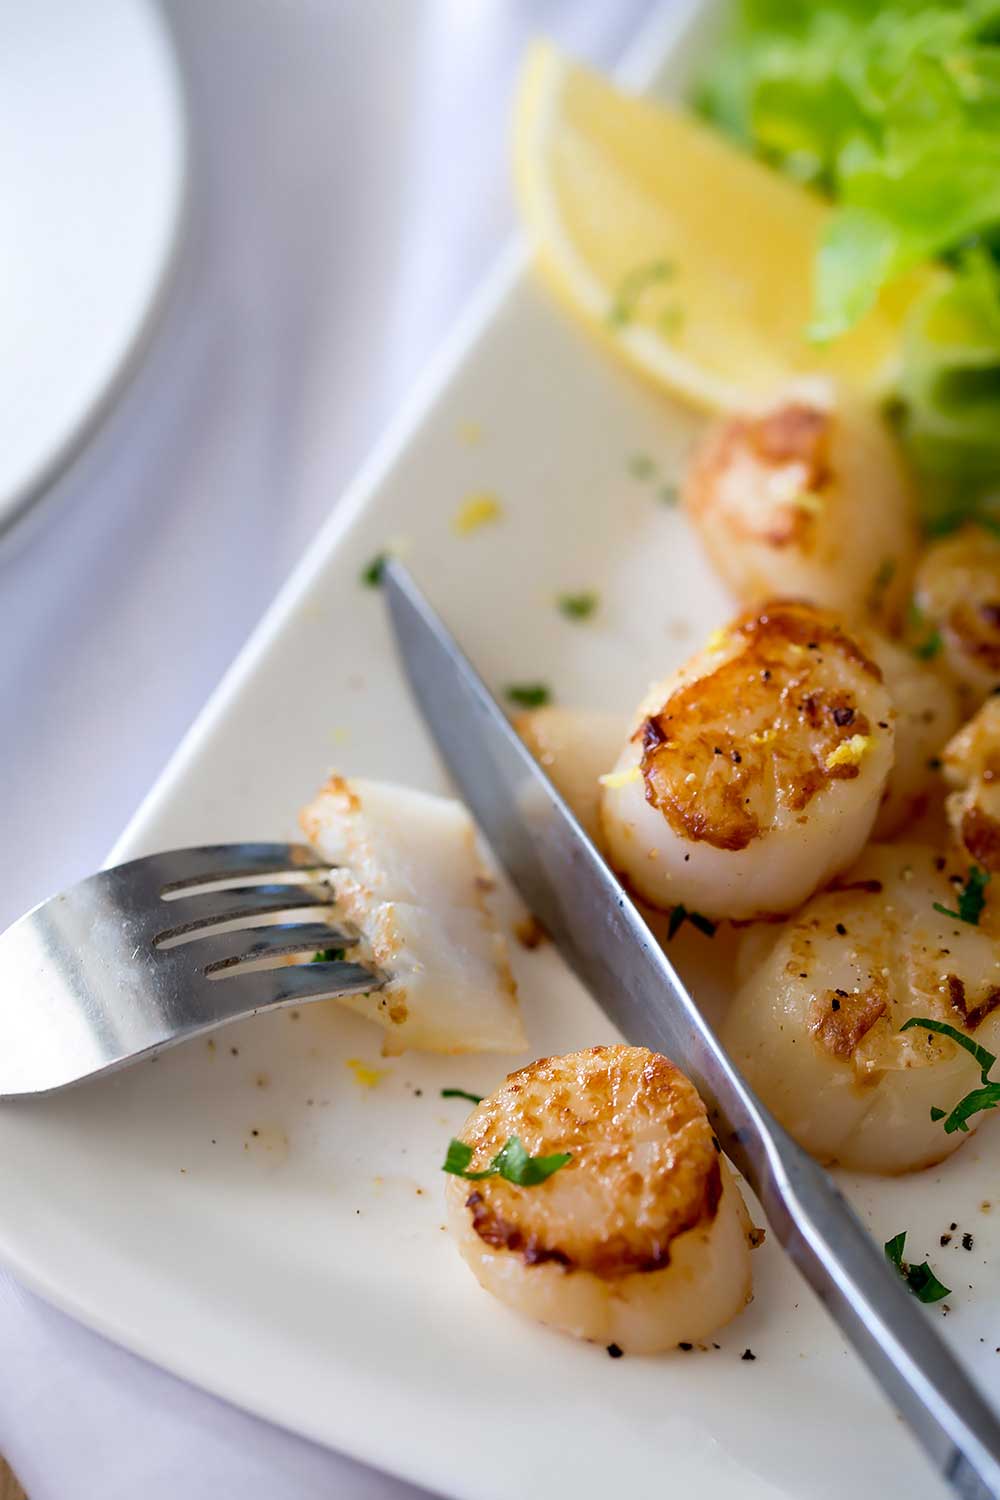 Firm buttery seared scallops, seasoned with lemon served with a fresh and crunchy apple and parsley salad with shallot dressing. | Sprinkles and Sprouts